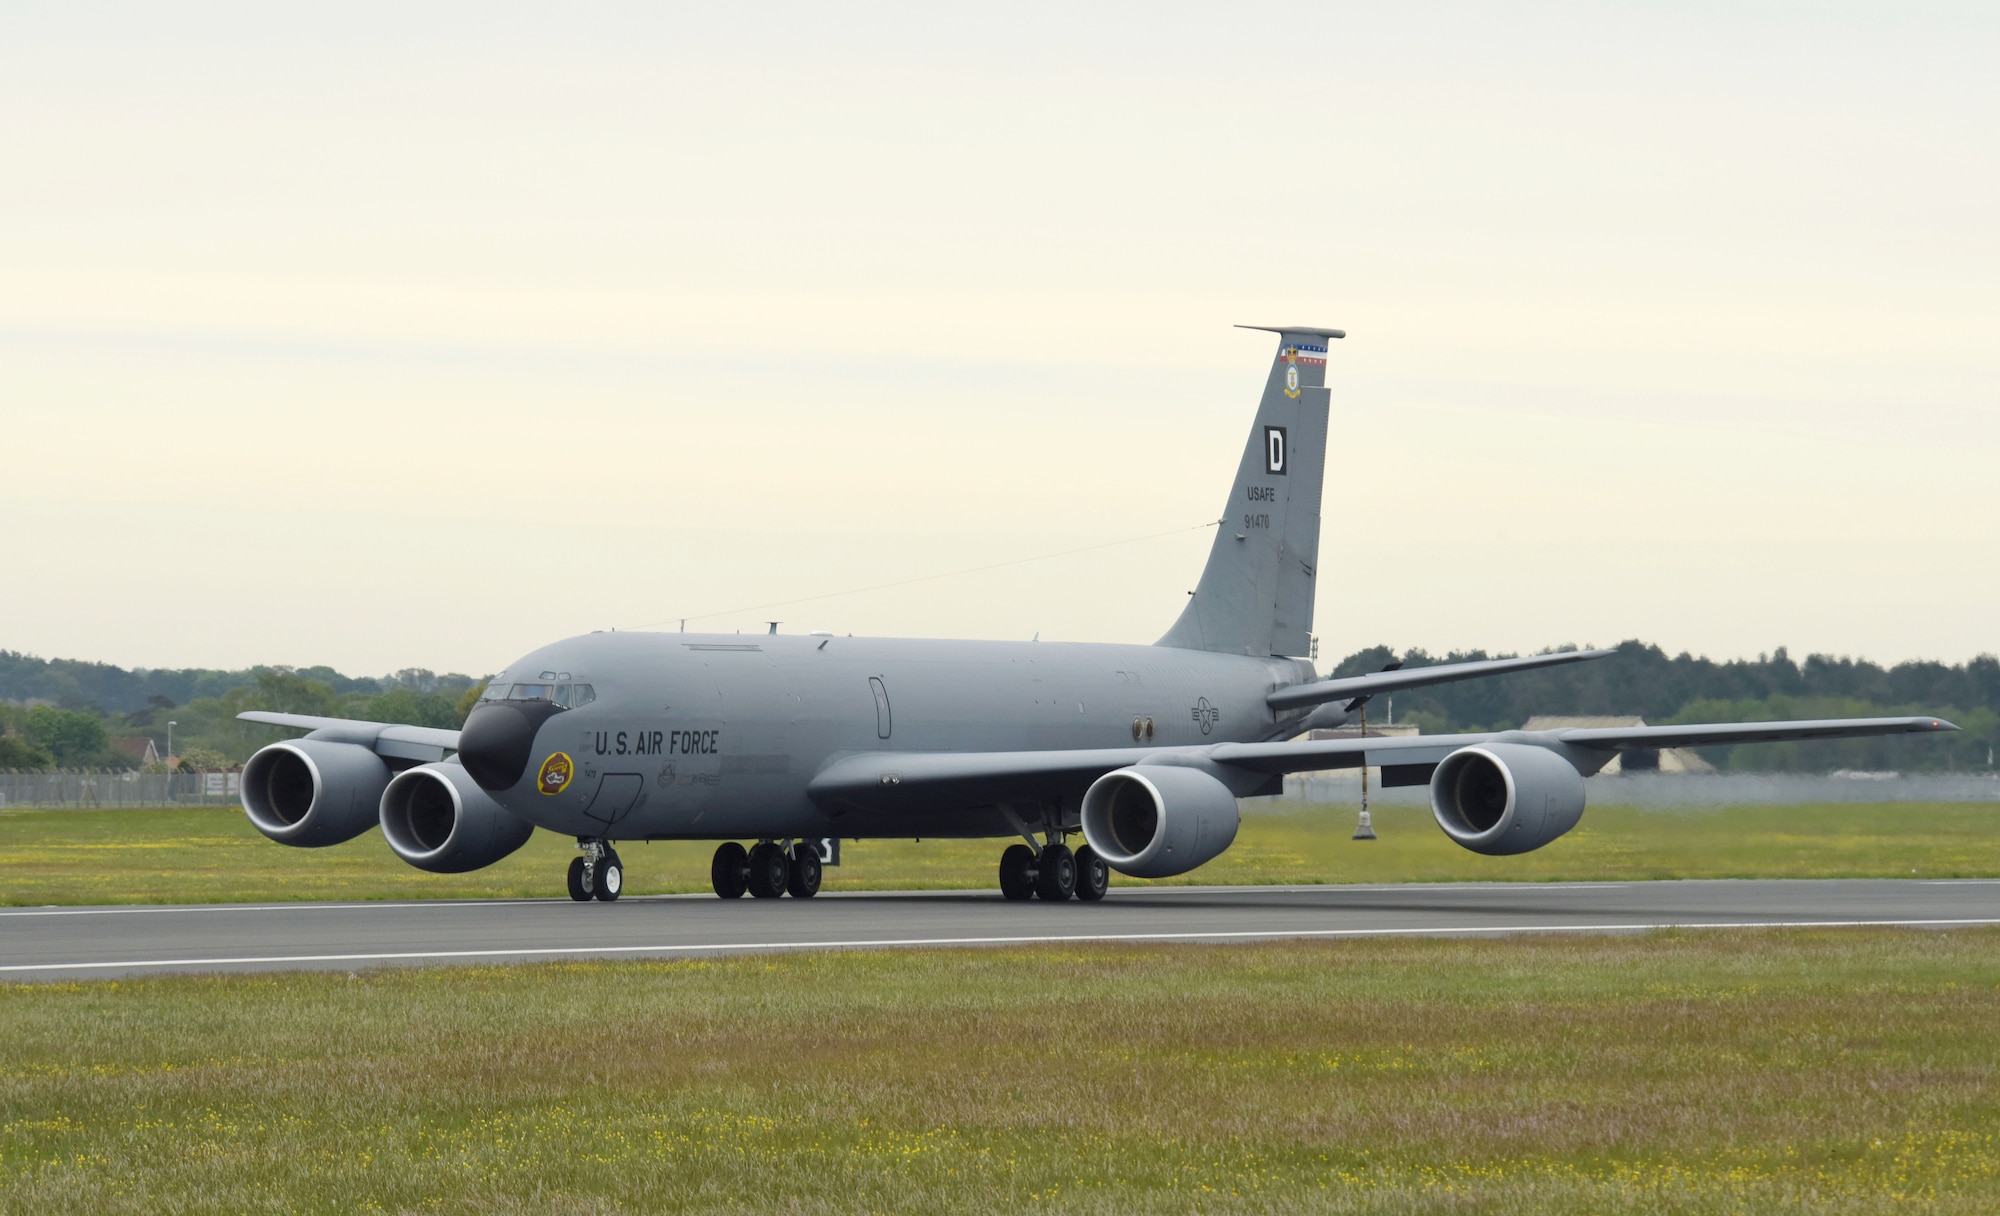 A U.S. Air Force KC-135 Stratotanker aircraft taxis down the runway during an elephant walk with a KC-10 Extender aircraft and a Royal Air Force A330 Voyager aircraft May 20, 2021, at RAF Mildenhall, England. The elephant walk was part of the European Tanker Symposium which brings tanker crew from NATO countries, along with other U.S. and Canadian forces together to share experiences and knowledge. (U.S. Air Force photo by Karen Abeyasekere)